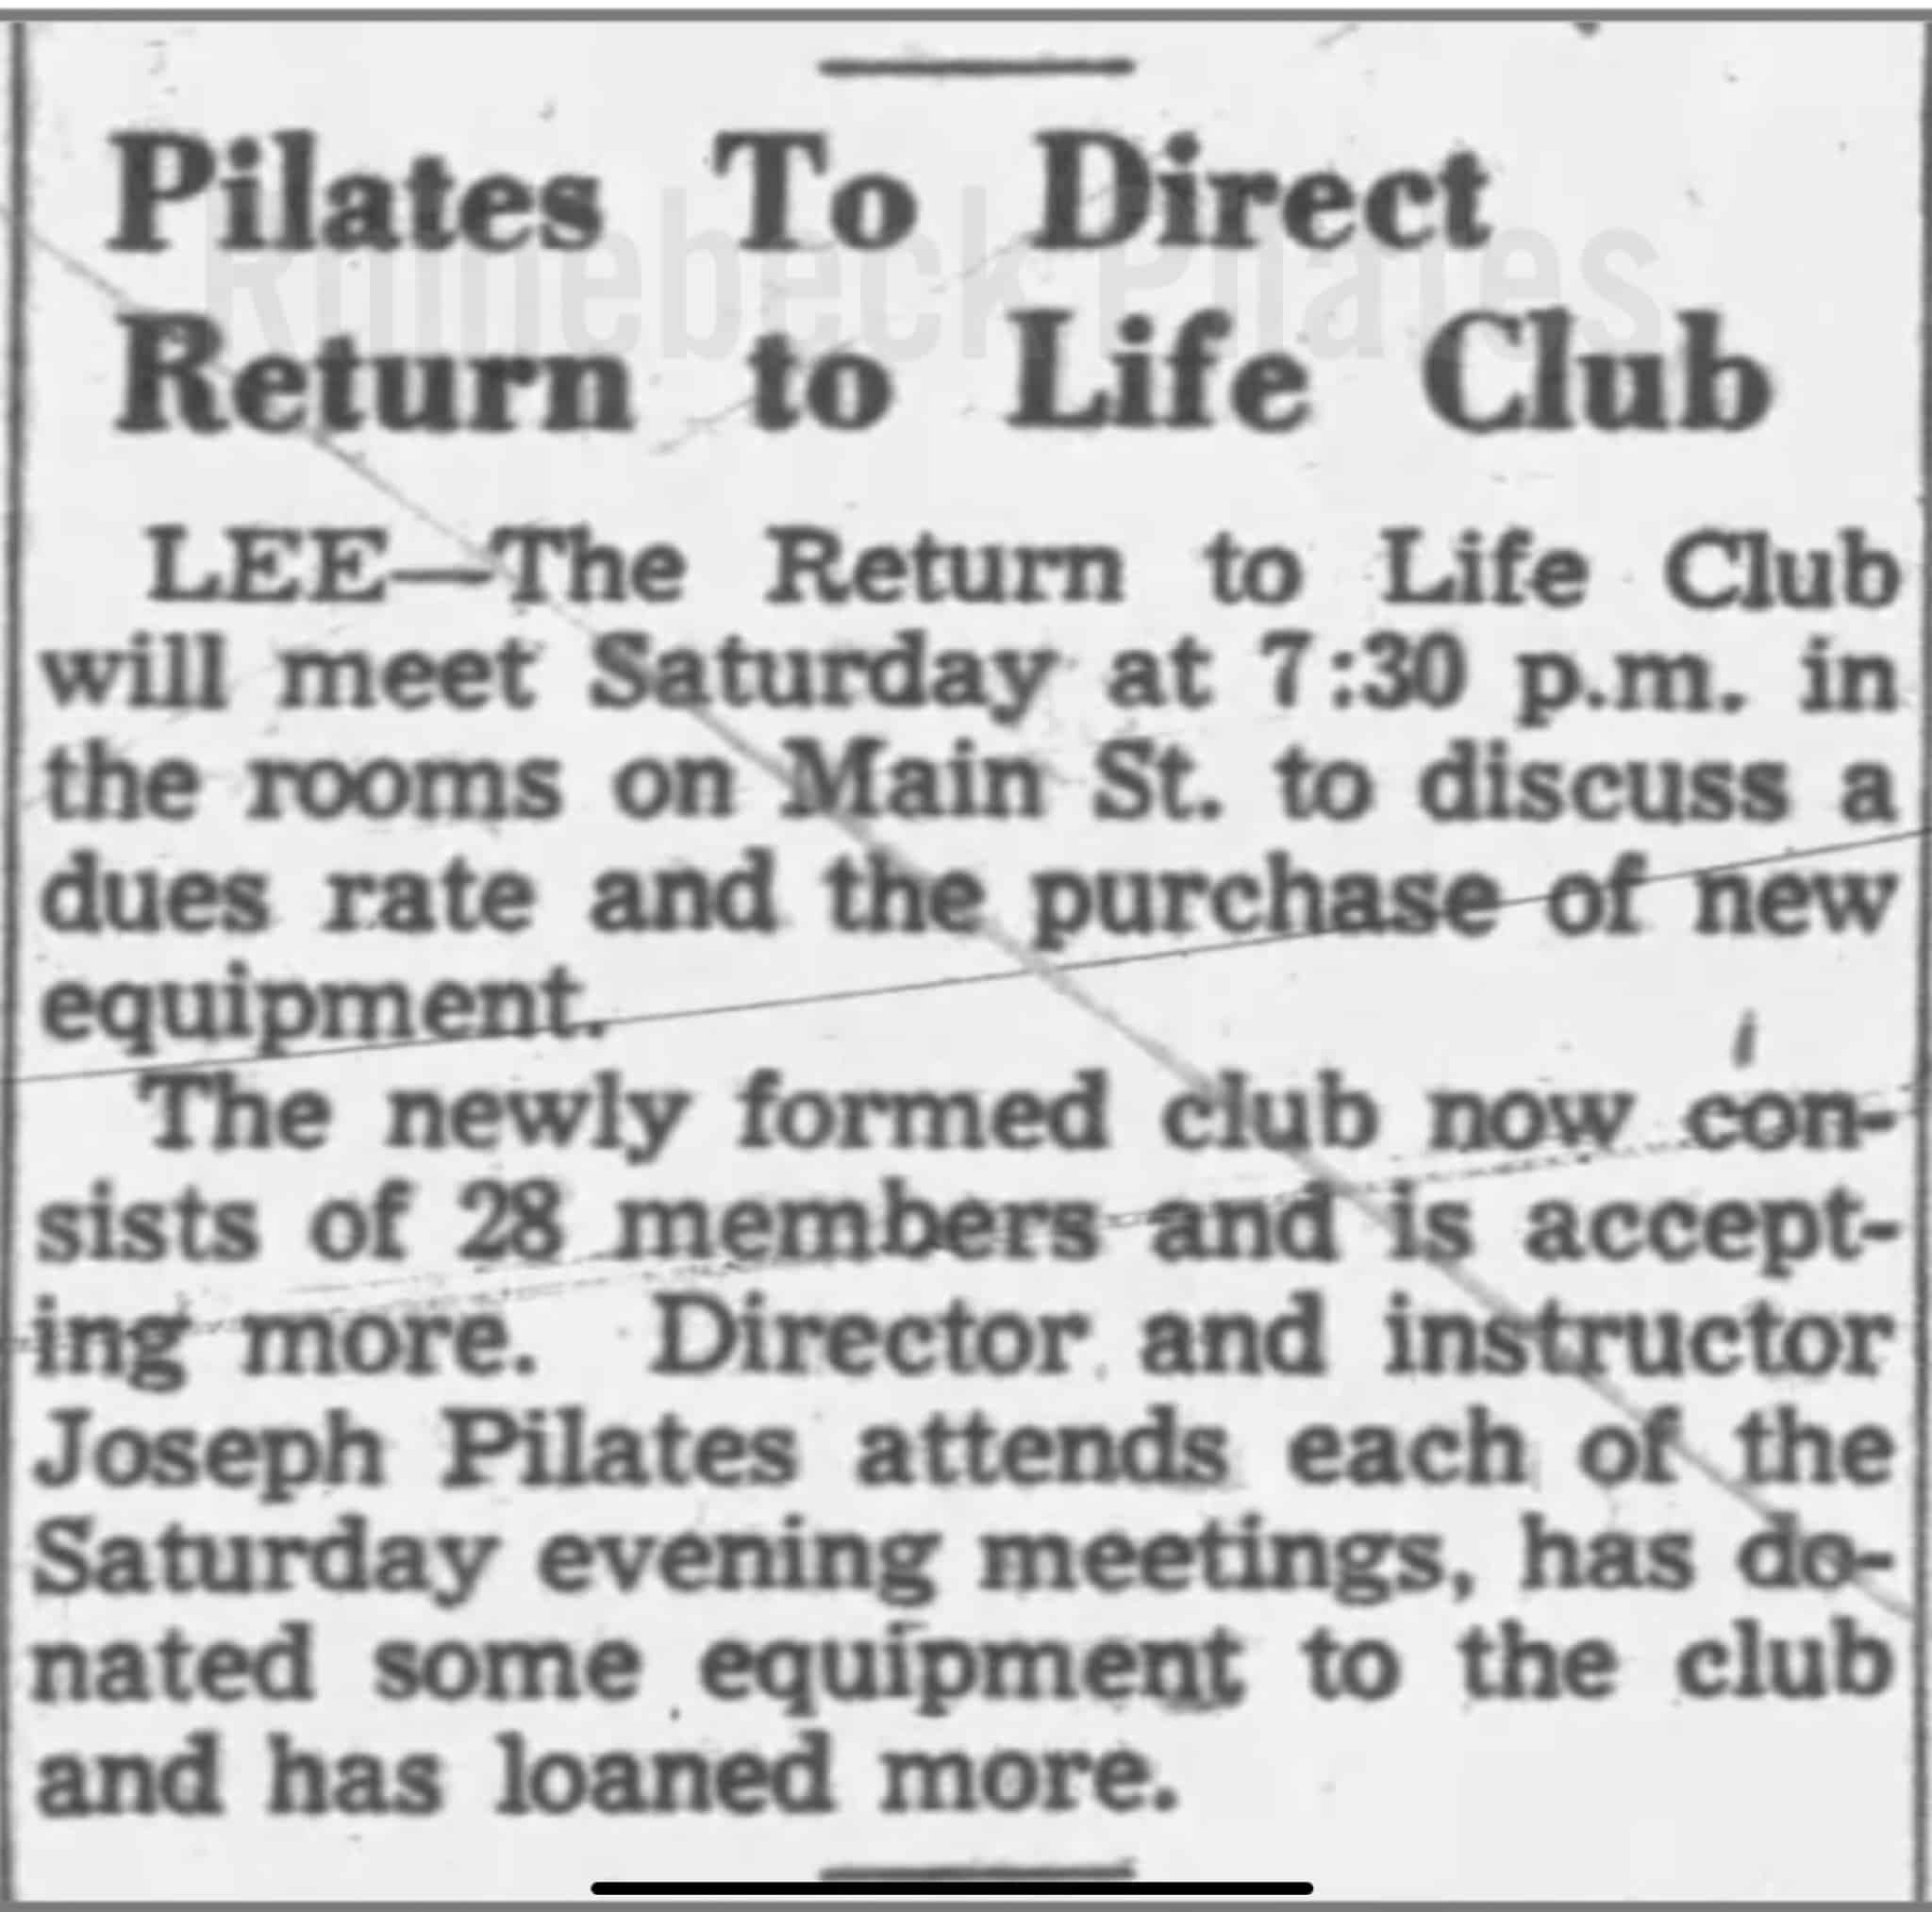 Article "Pilates to Direct Return to Life Club"